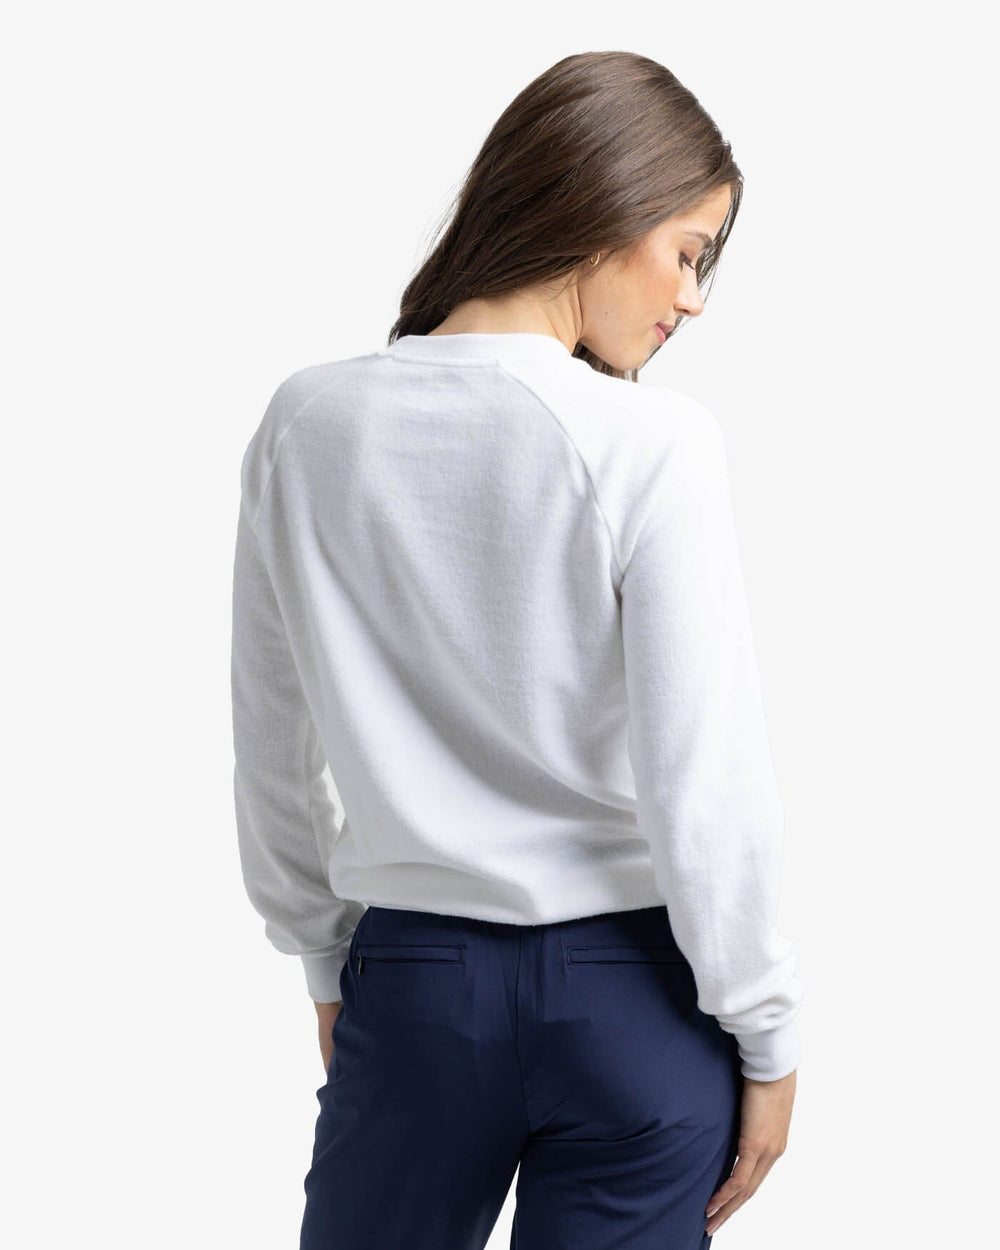 The back view of the Southern Tide Seaside Retreat Sweatshirt by Southern Tide - Classic White